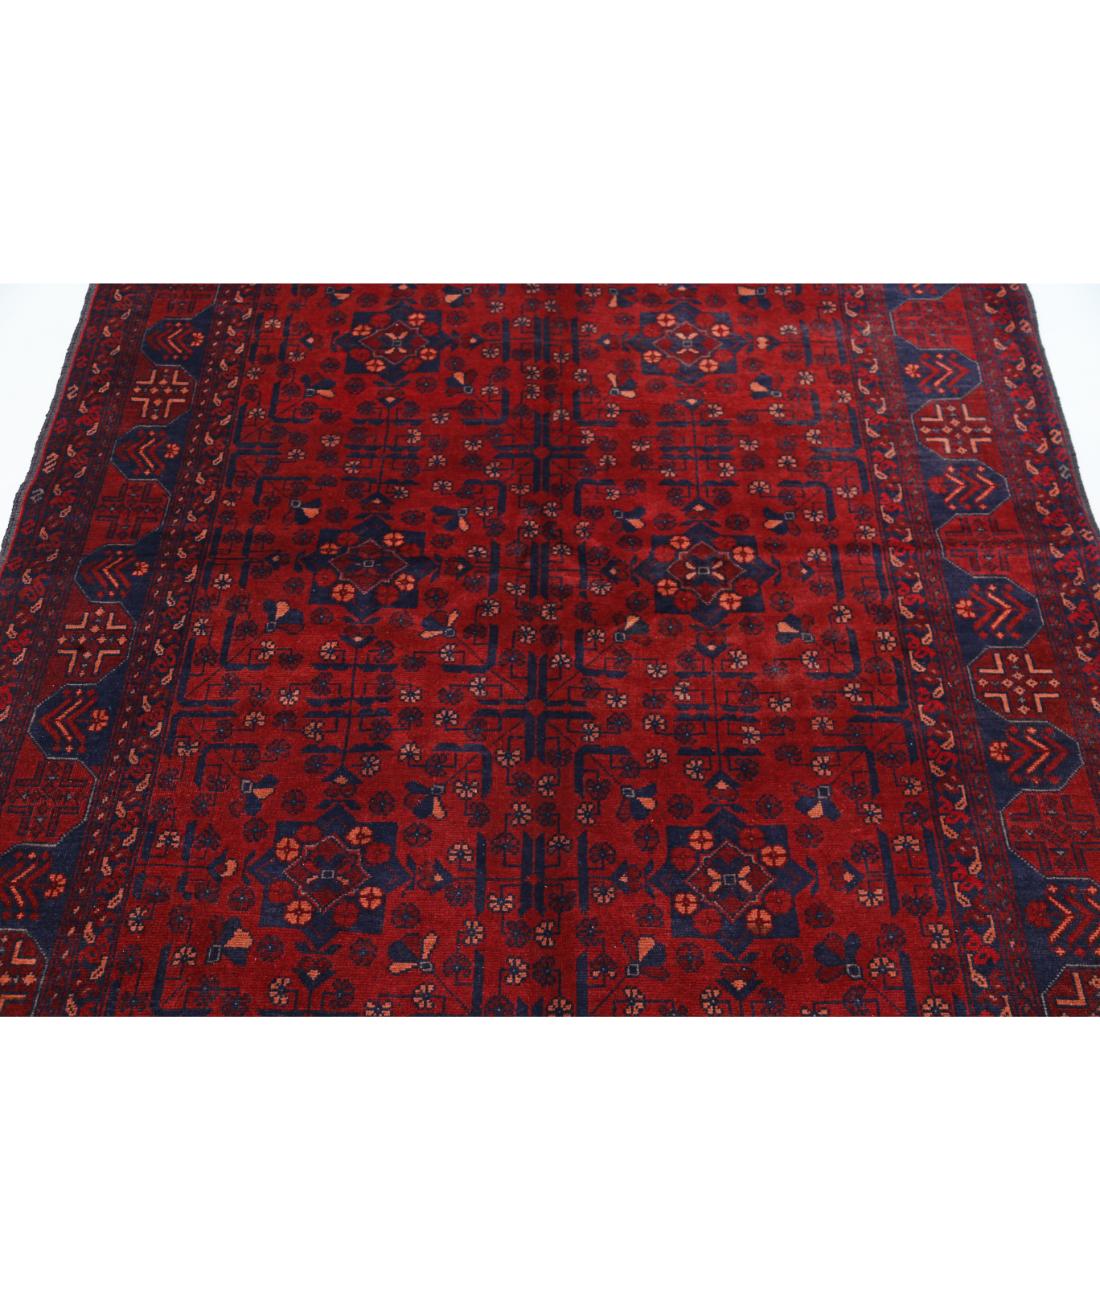 Afghan 4' 11" X 6' 4" Hand-Knotted Wool Rug 4' 11" X 6' 4" (150 X 193) / Red / Blue